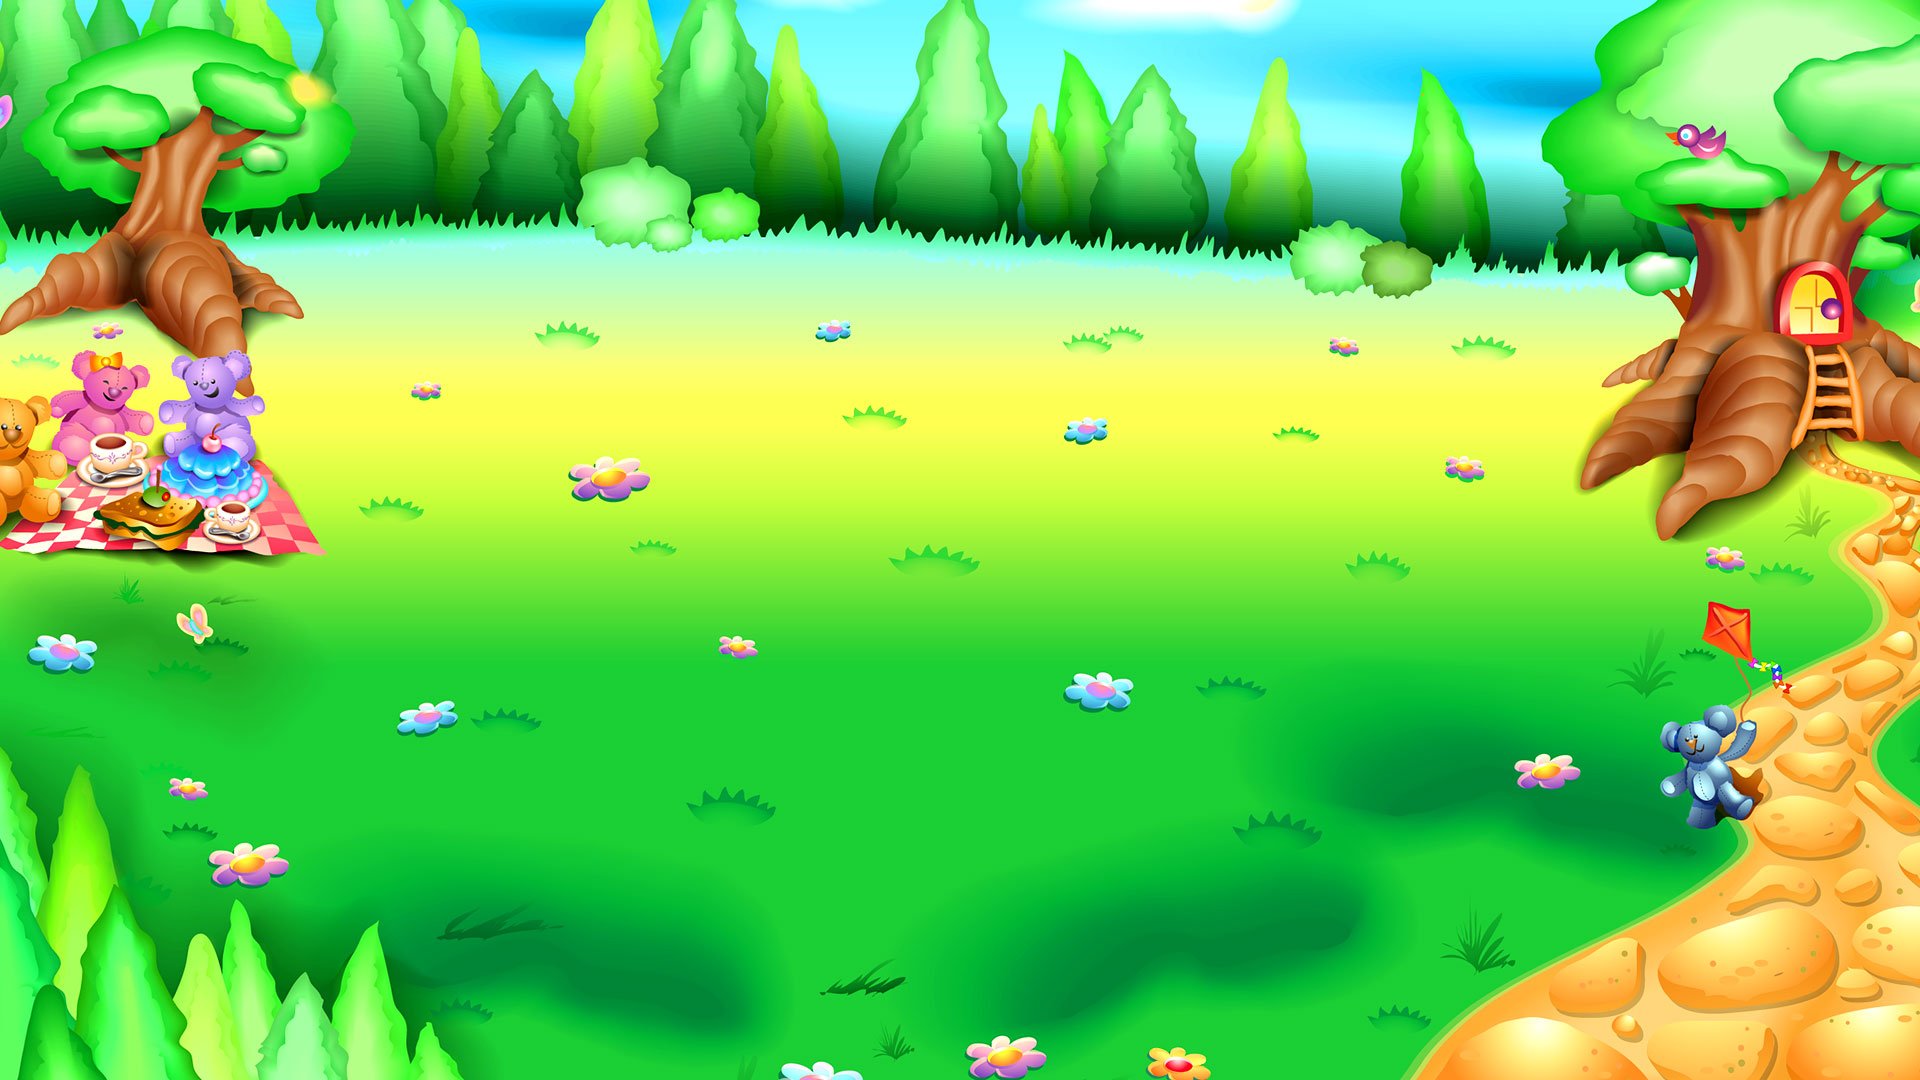 Game hight resolution background Teddy Bear's Picnic